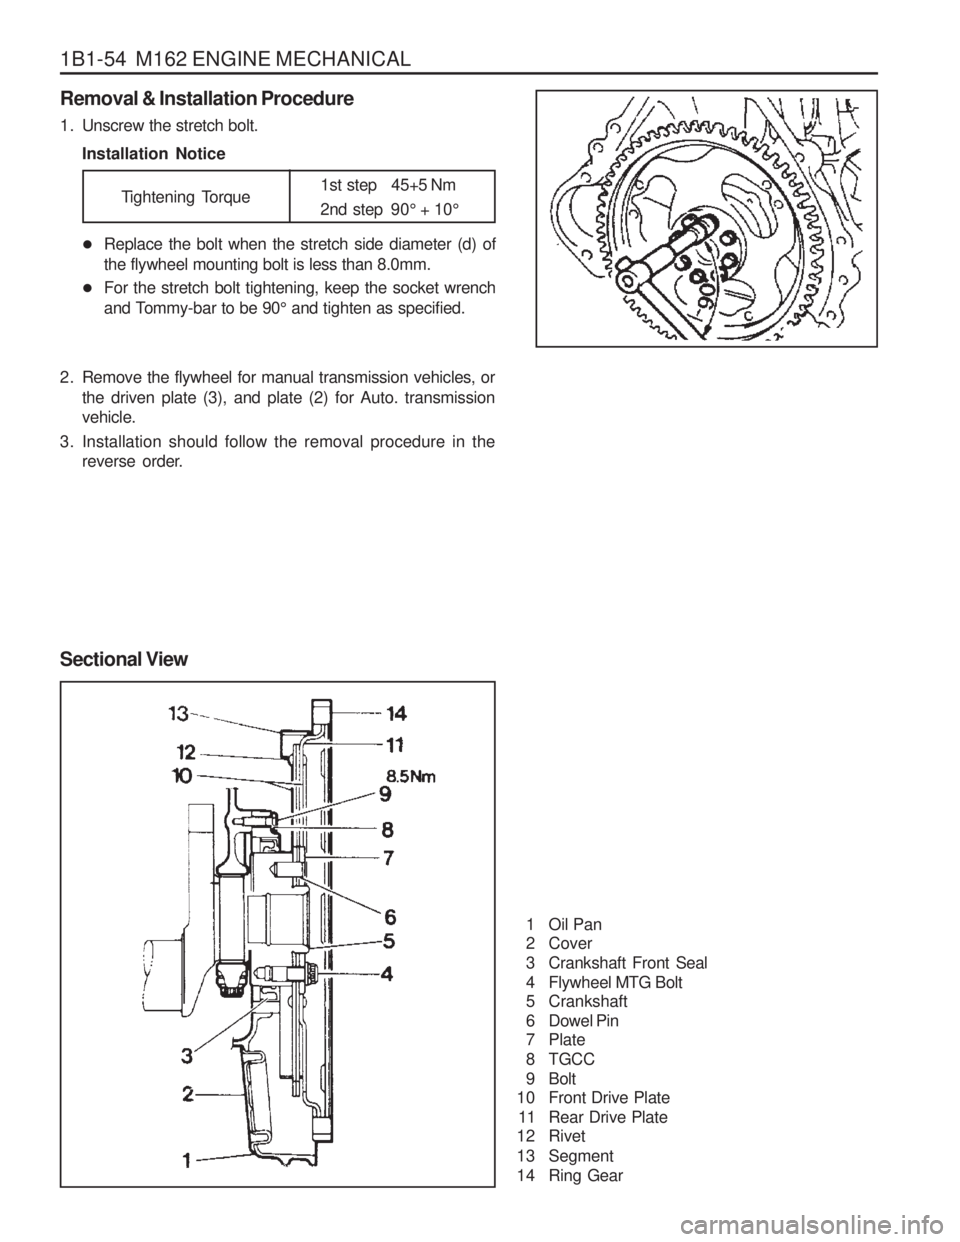 SSANGYONG MUSSO 2003  Service Manual 1B1-54  M162 ENGINE MECHANICAL Removal & Installation Procedure 
1. Unscrew the stretch bolt.Installation Notice
Sectional View
1 Oil Pan 
2 Cover 
3 Crankshaft Front Seal
4 Flywheel MTG Bolt 
5 Crank